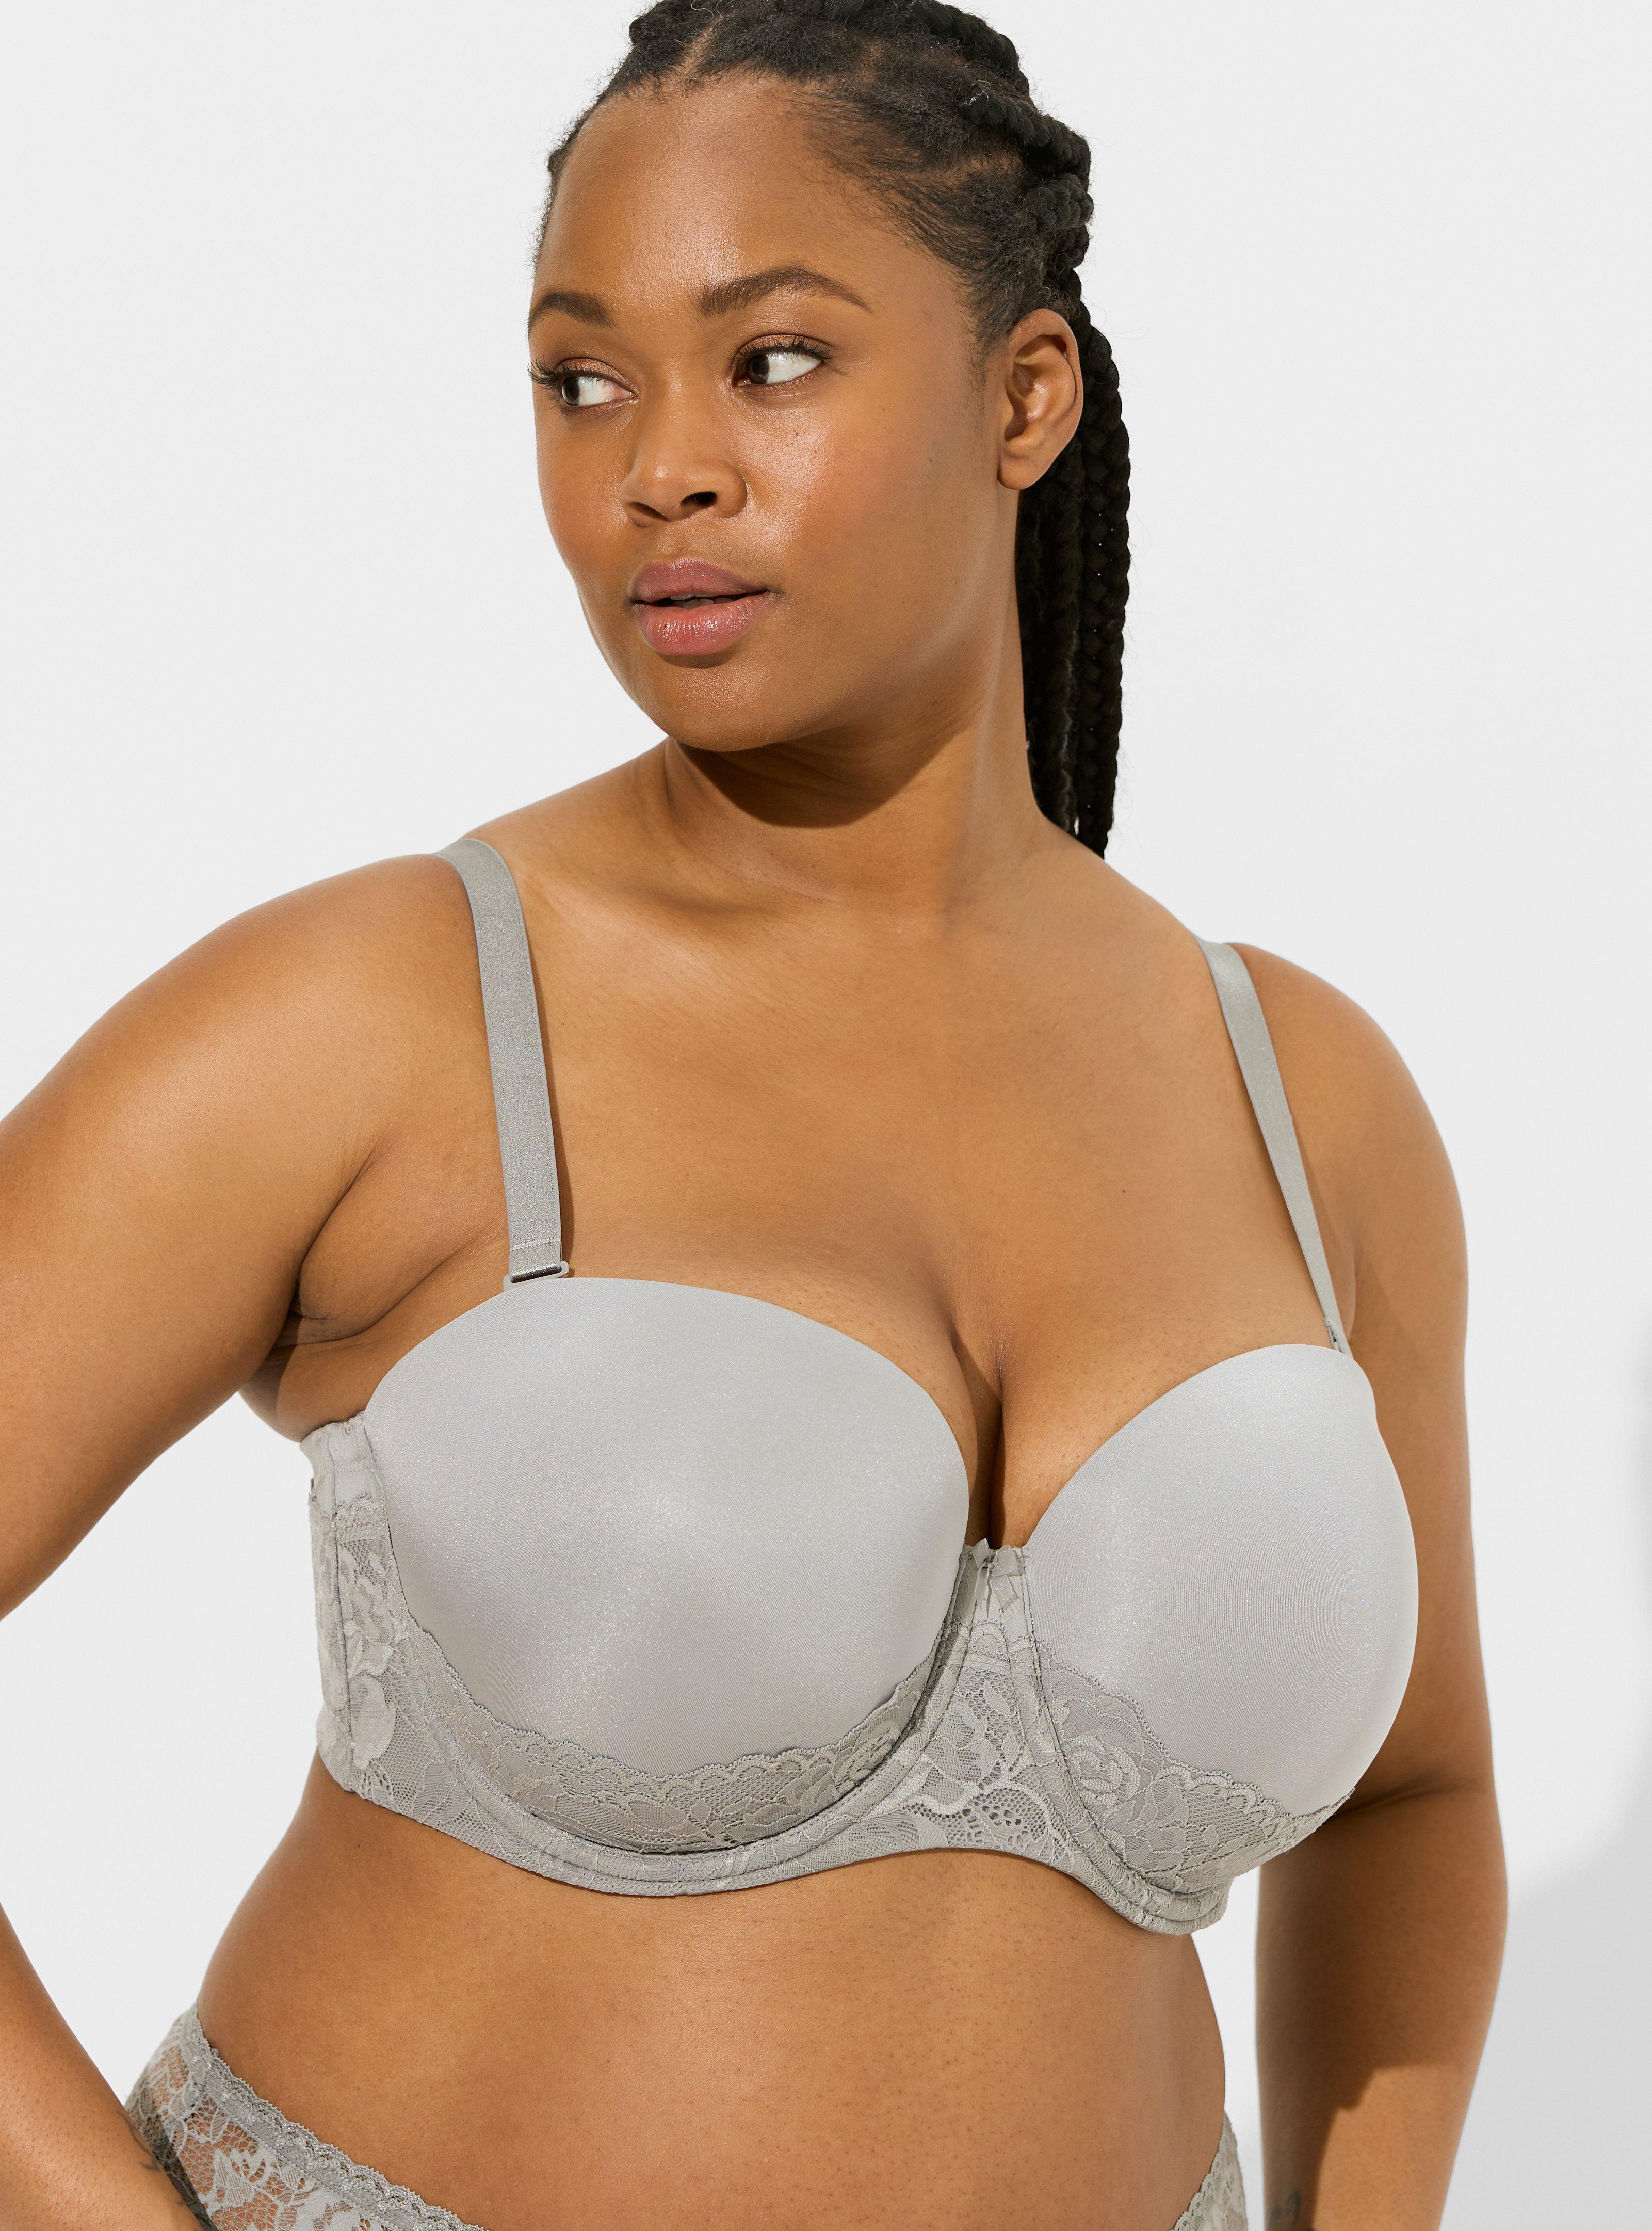 F, G, & H Cup Size Bras